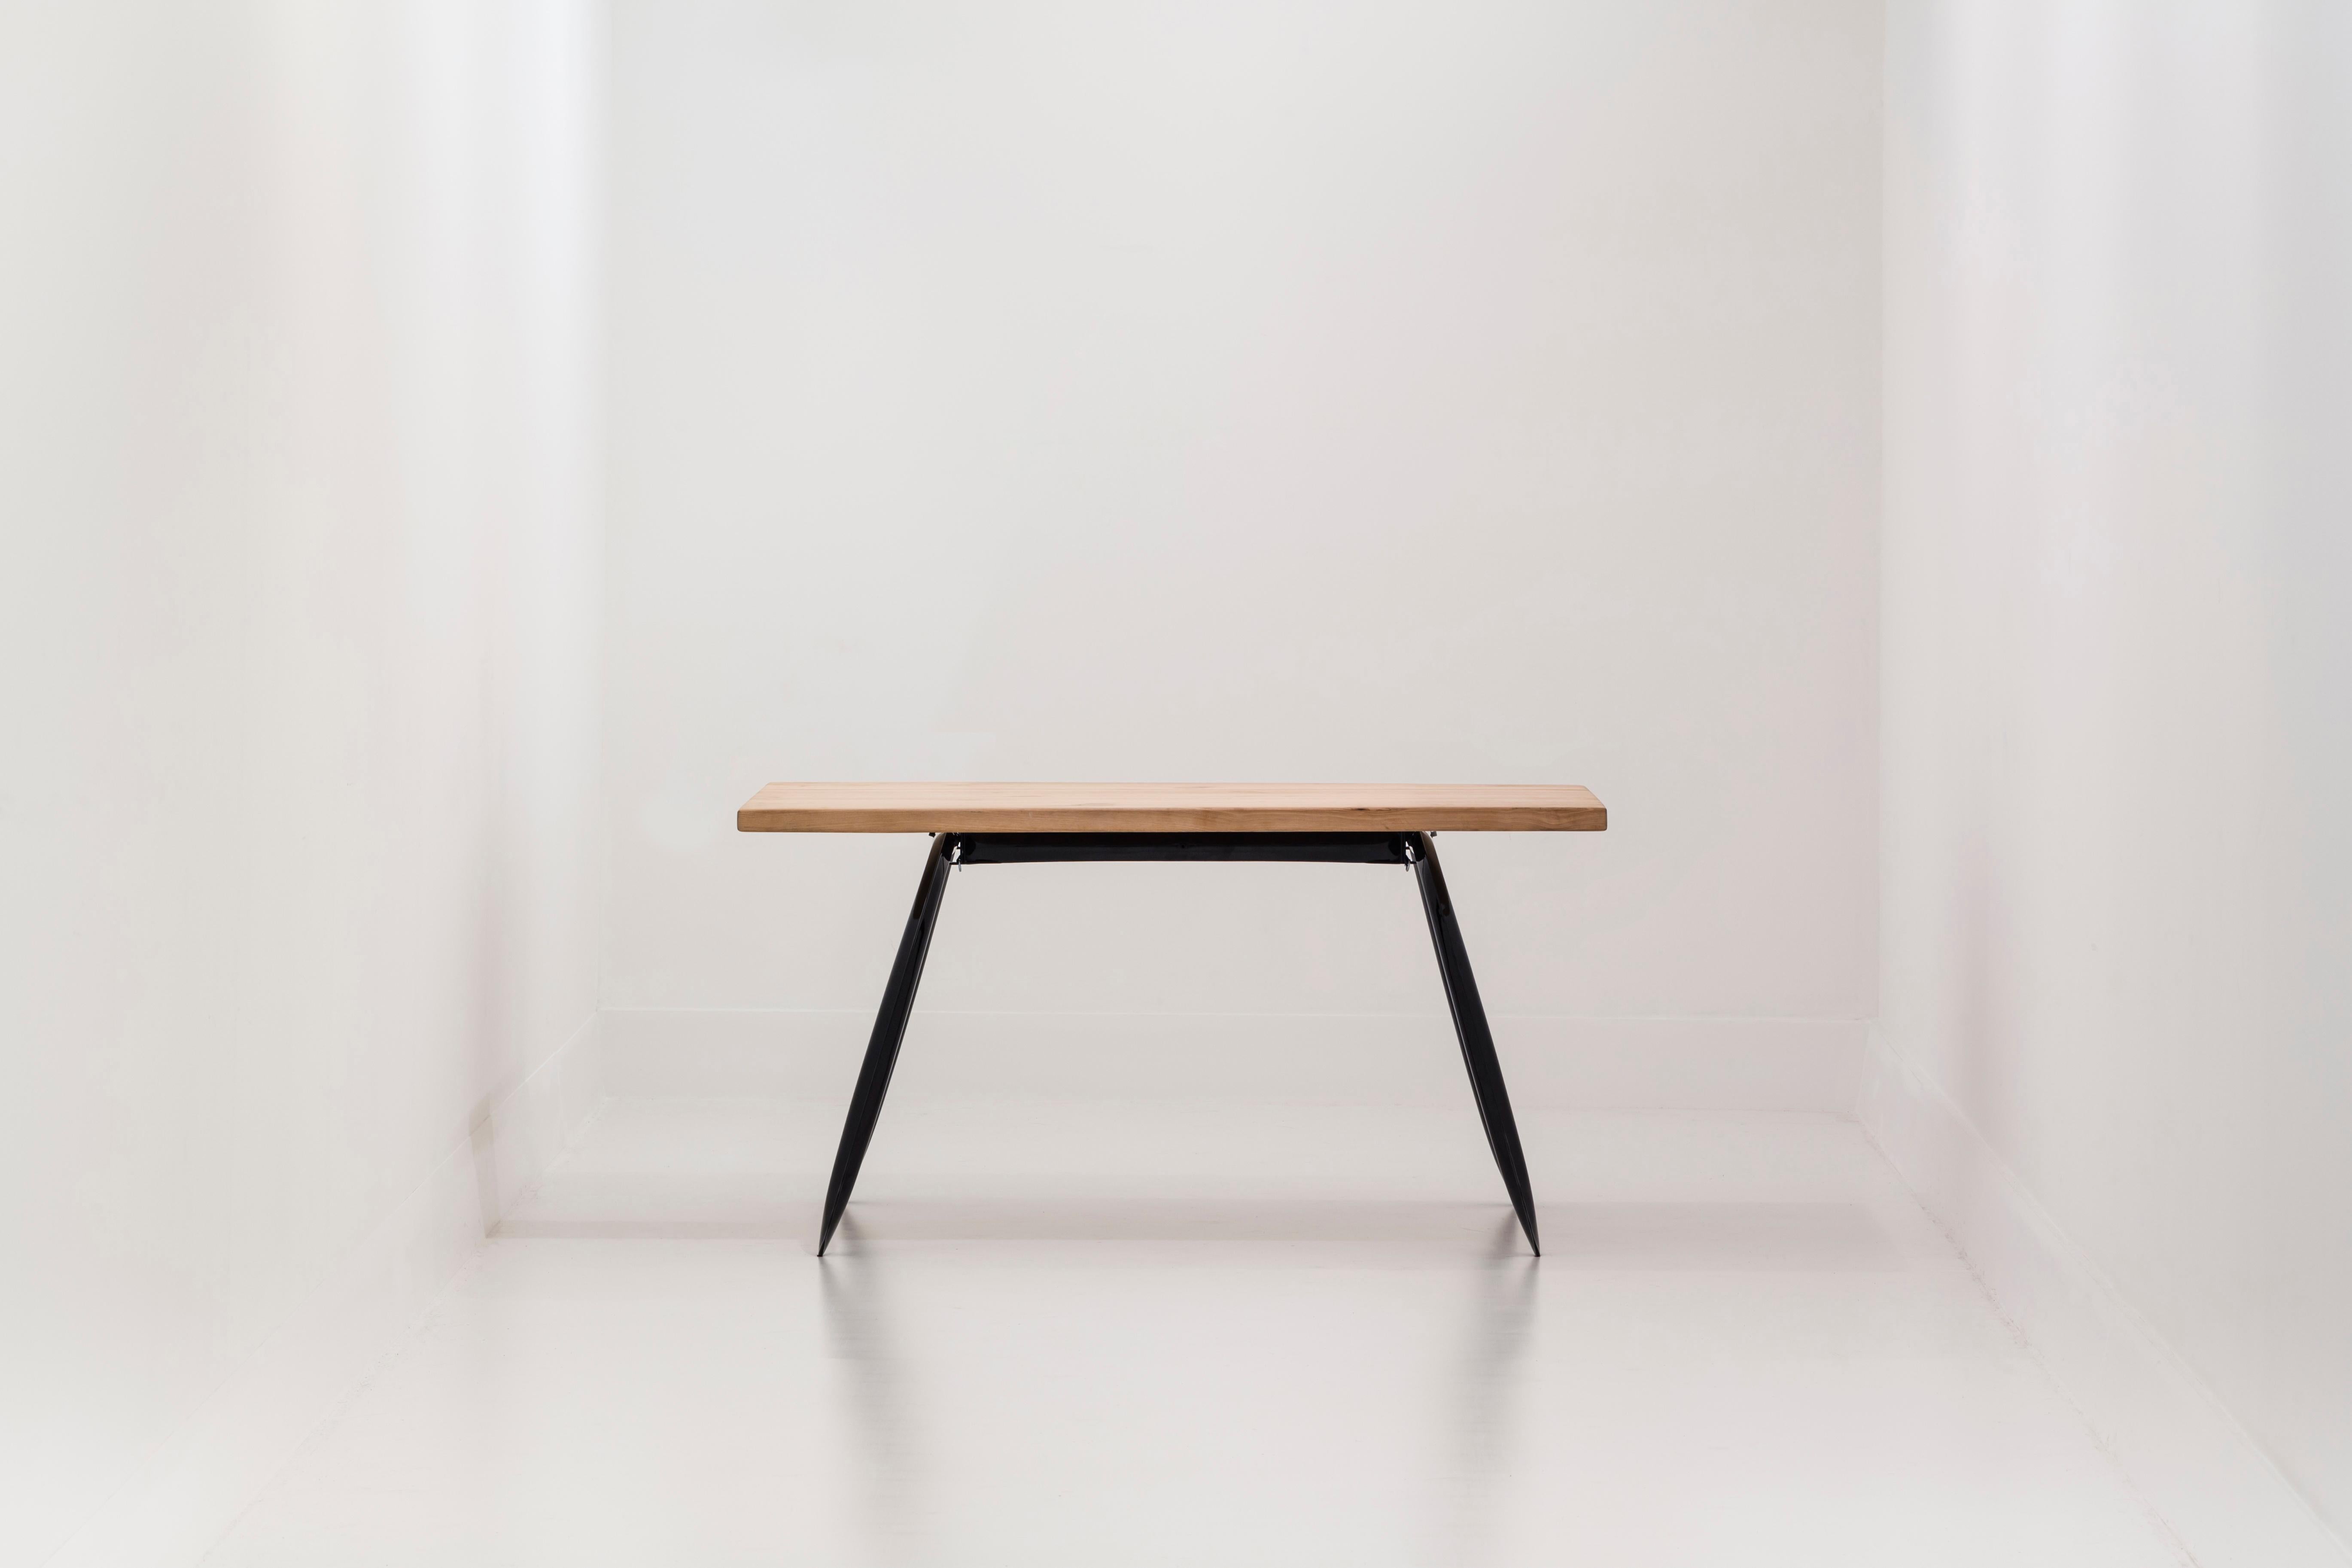 Koziol is a derivative of the Koza II trestle and is converting the trestle into a table frame for a small table to be used in smaller kitchens or as contract furniture for restaurants. Max. size of the table top 1,20 m x 1,20. The table tops need